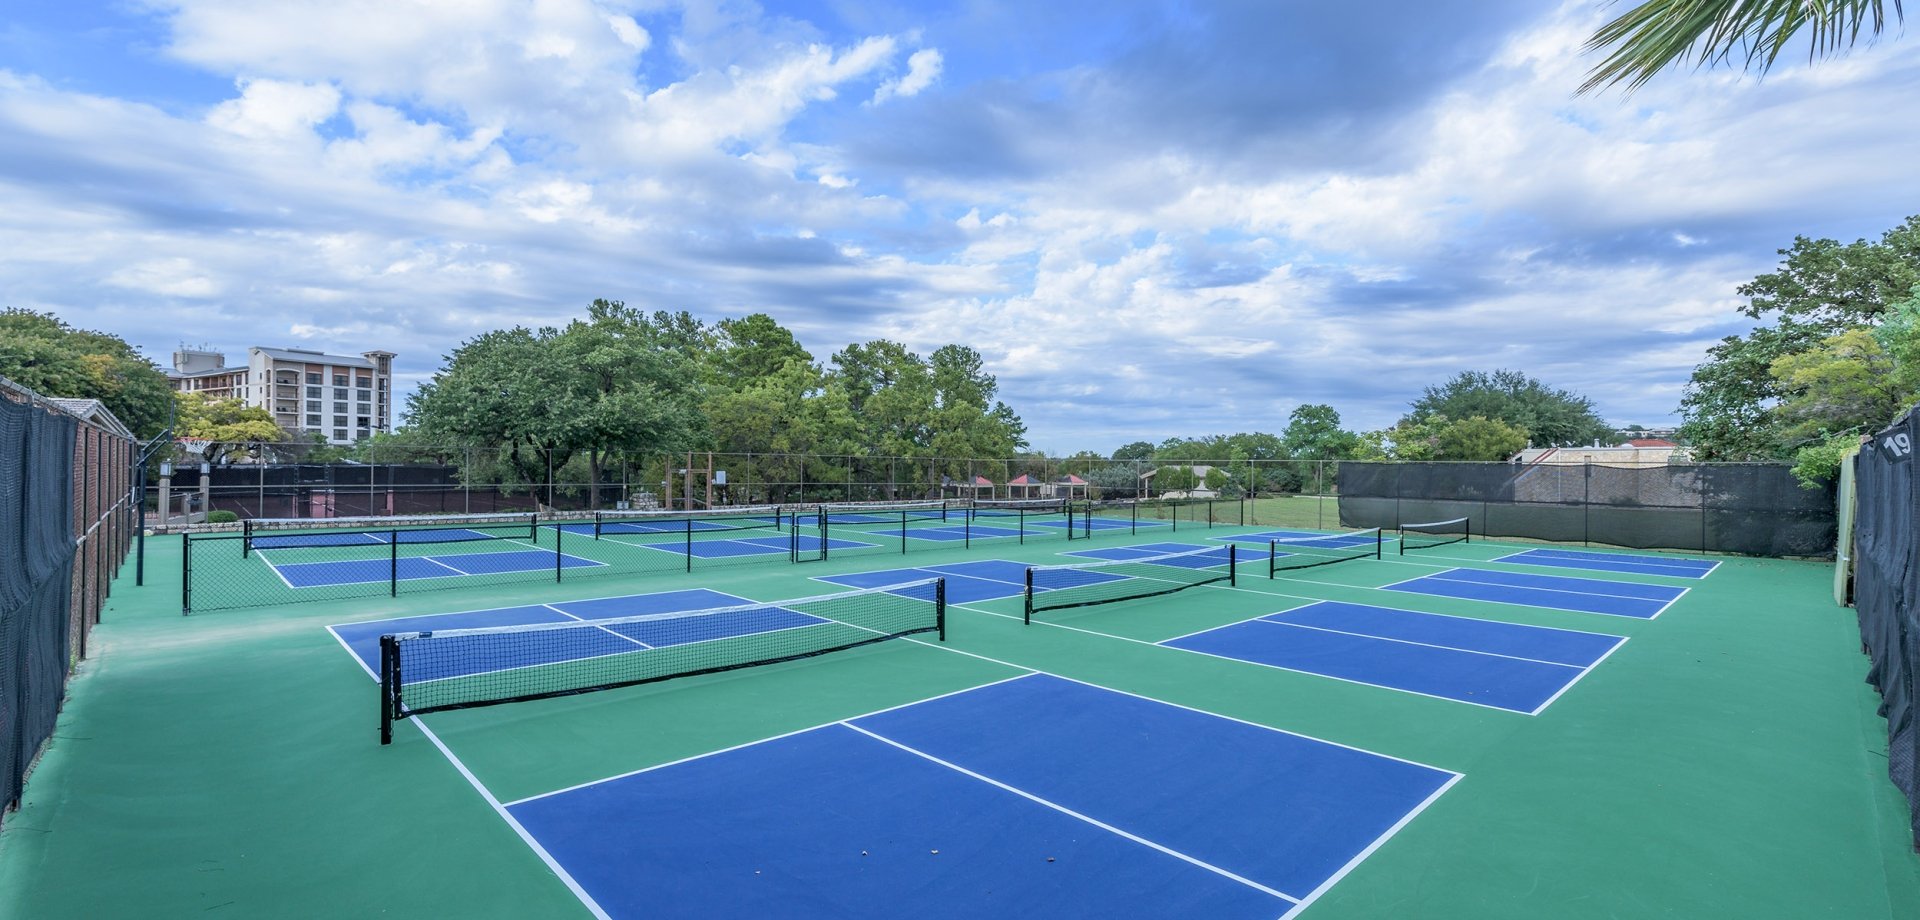 8 pickleball courts with green and blue paint.